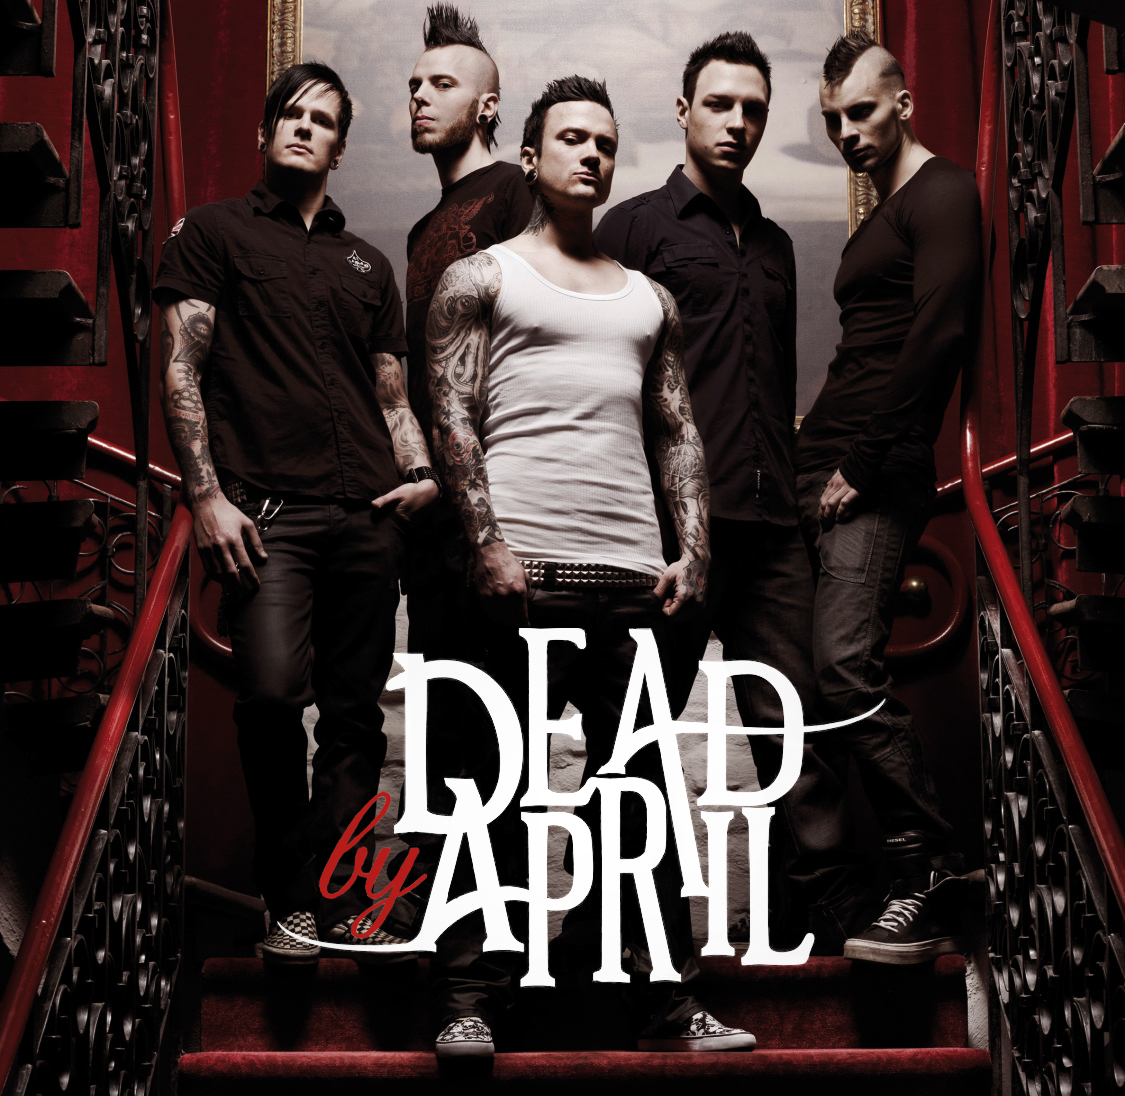 What Can I Say no screaming version | Dead by April